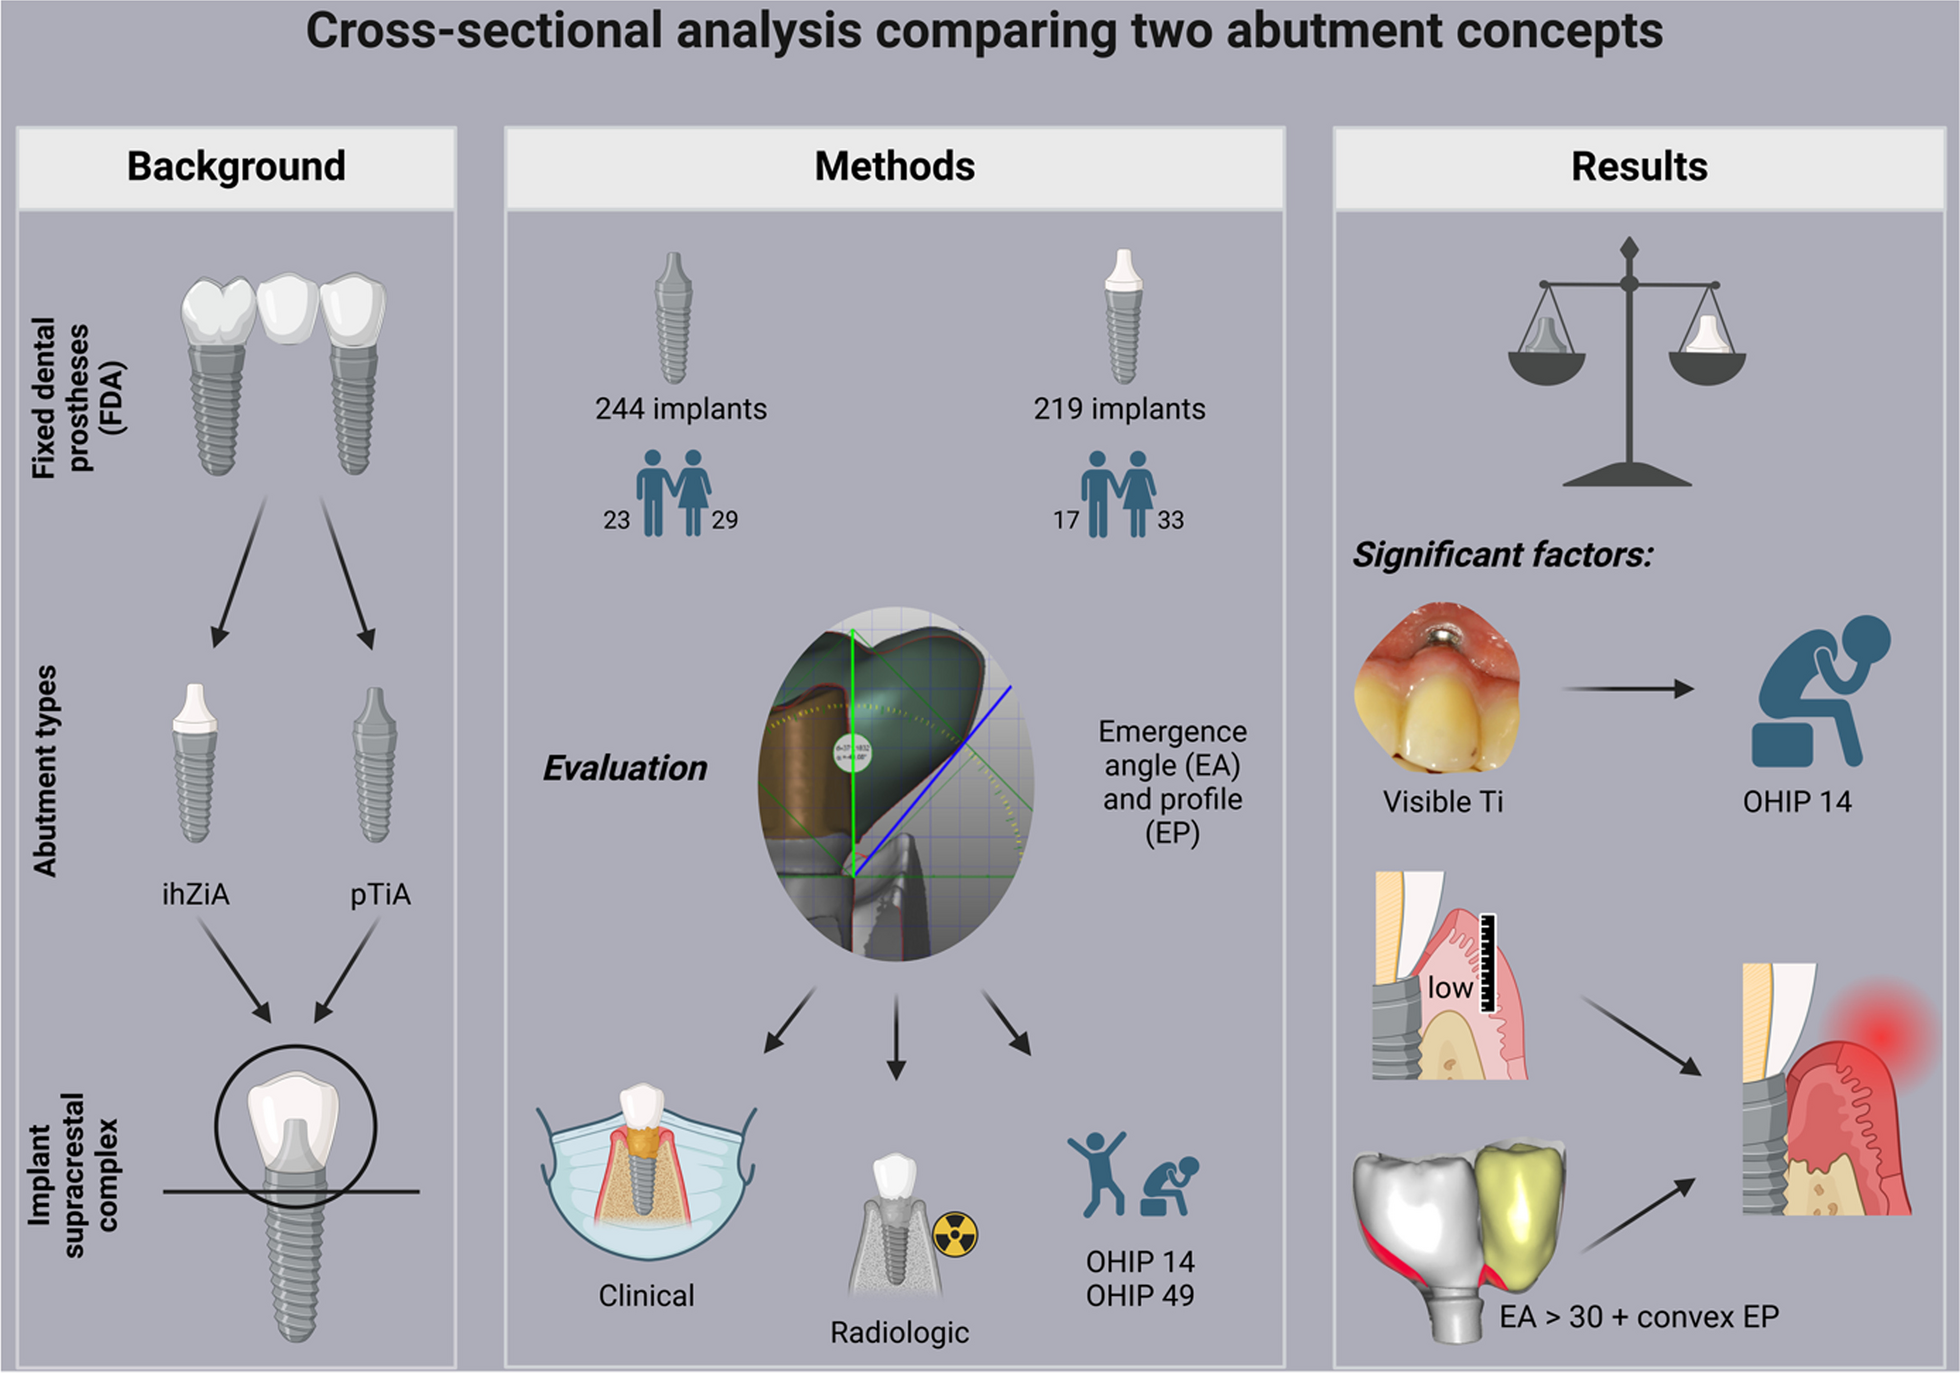 Cross-sectional analysis comparing prefabricated titanium to individualized hybrid zirconia abutments for cemented zirconia based fixed dental prostheses: a critical concept assessment